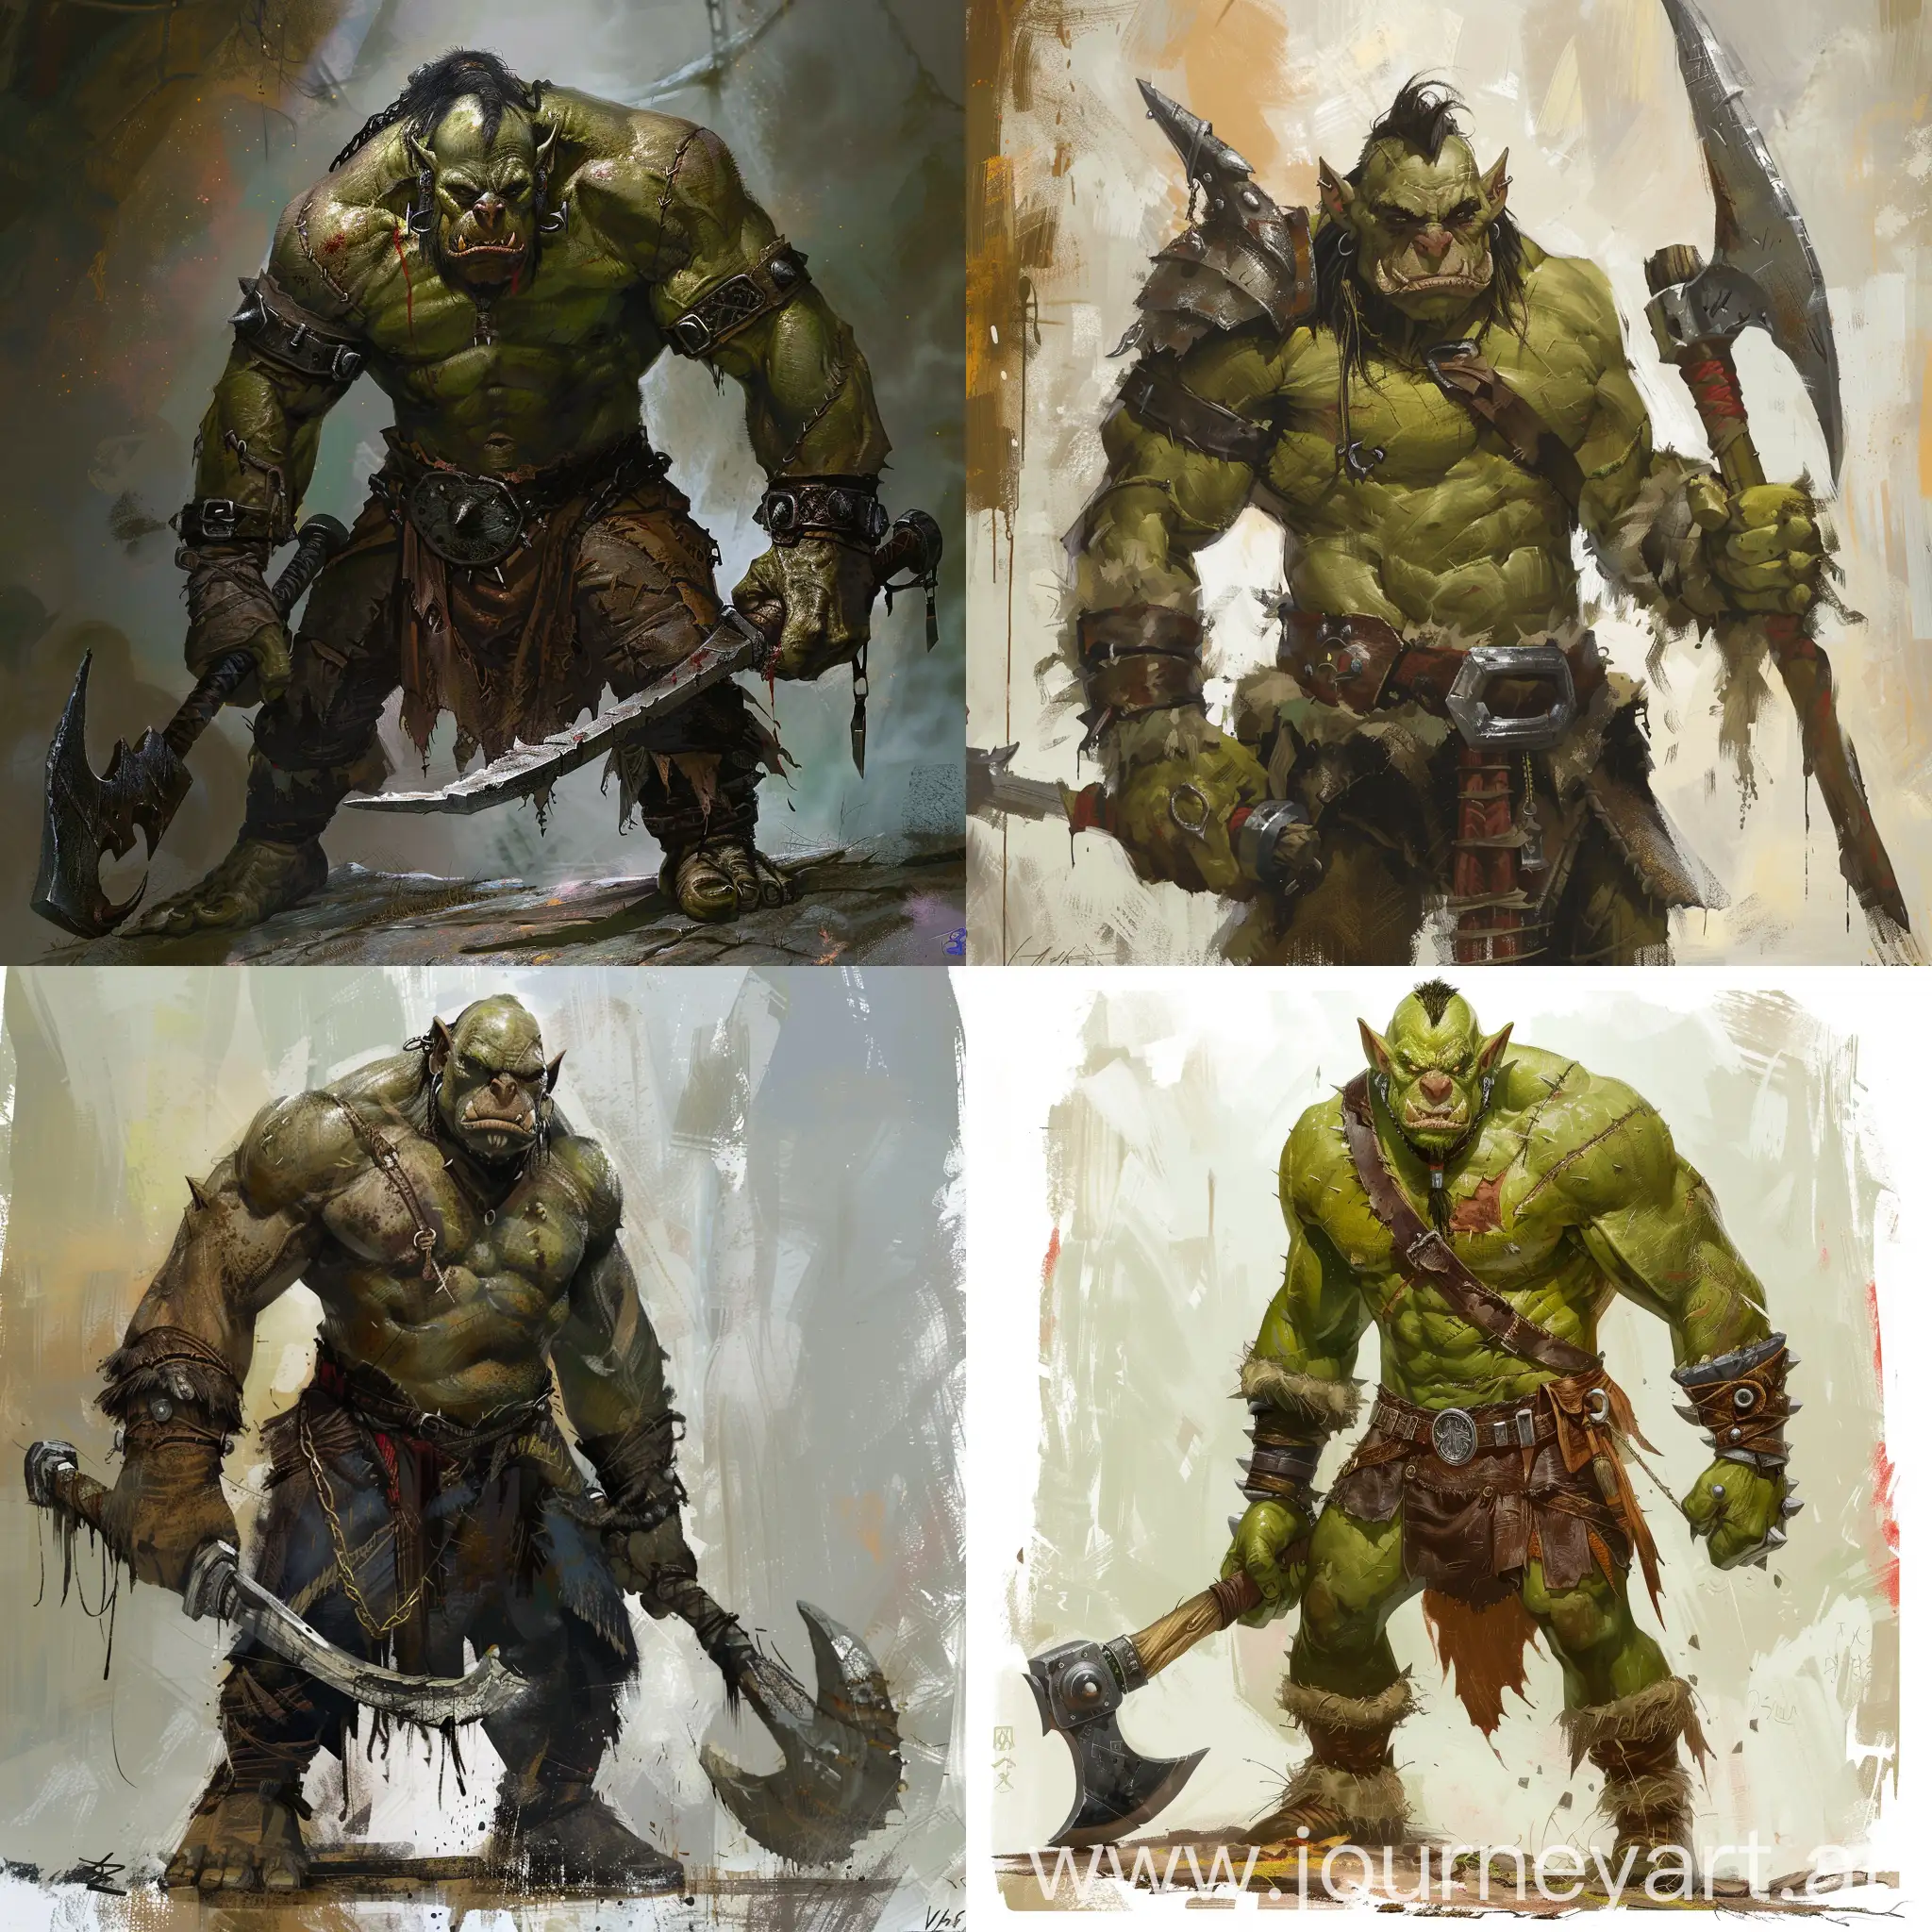 Formidable-Young-Orc-Wielding-Dual-Axes-in-Stunning-Art